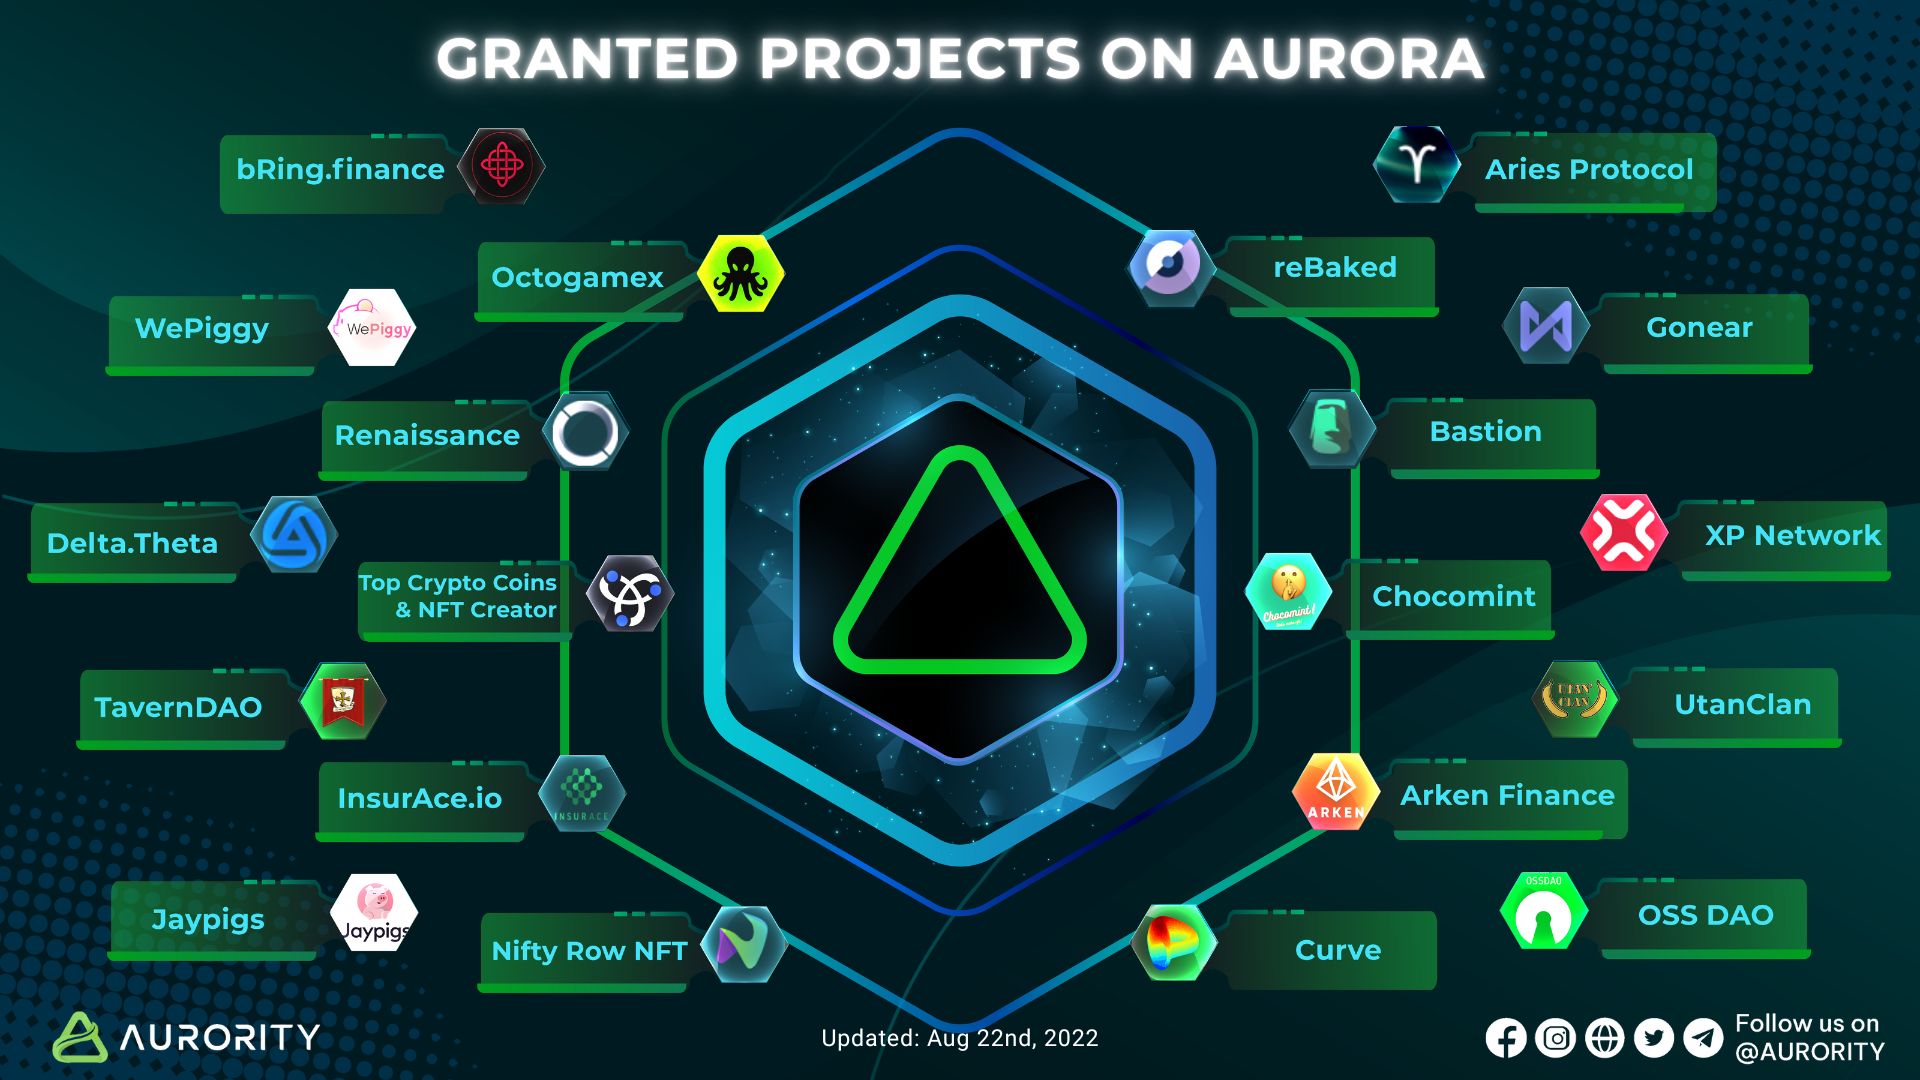 The projects are granted by Aurora